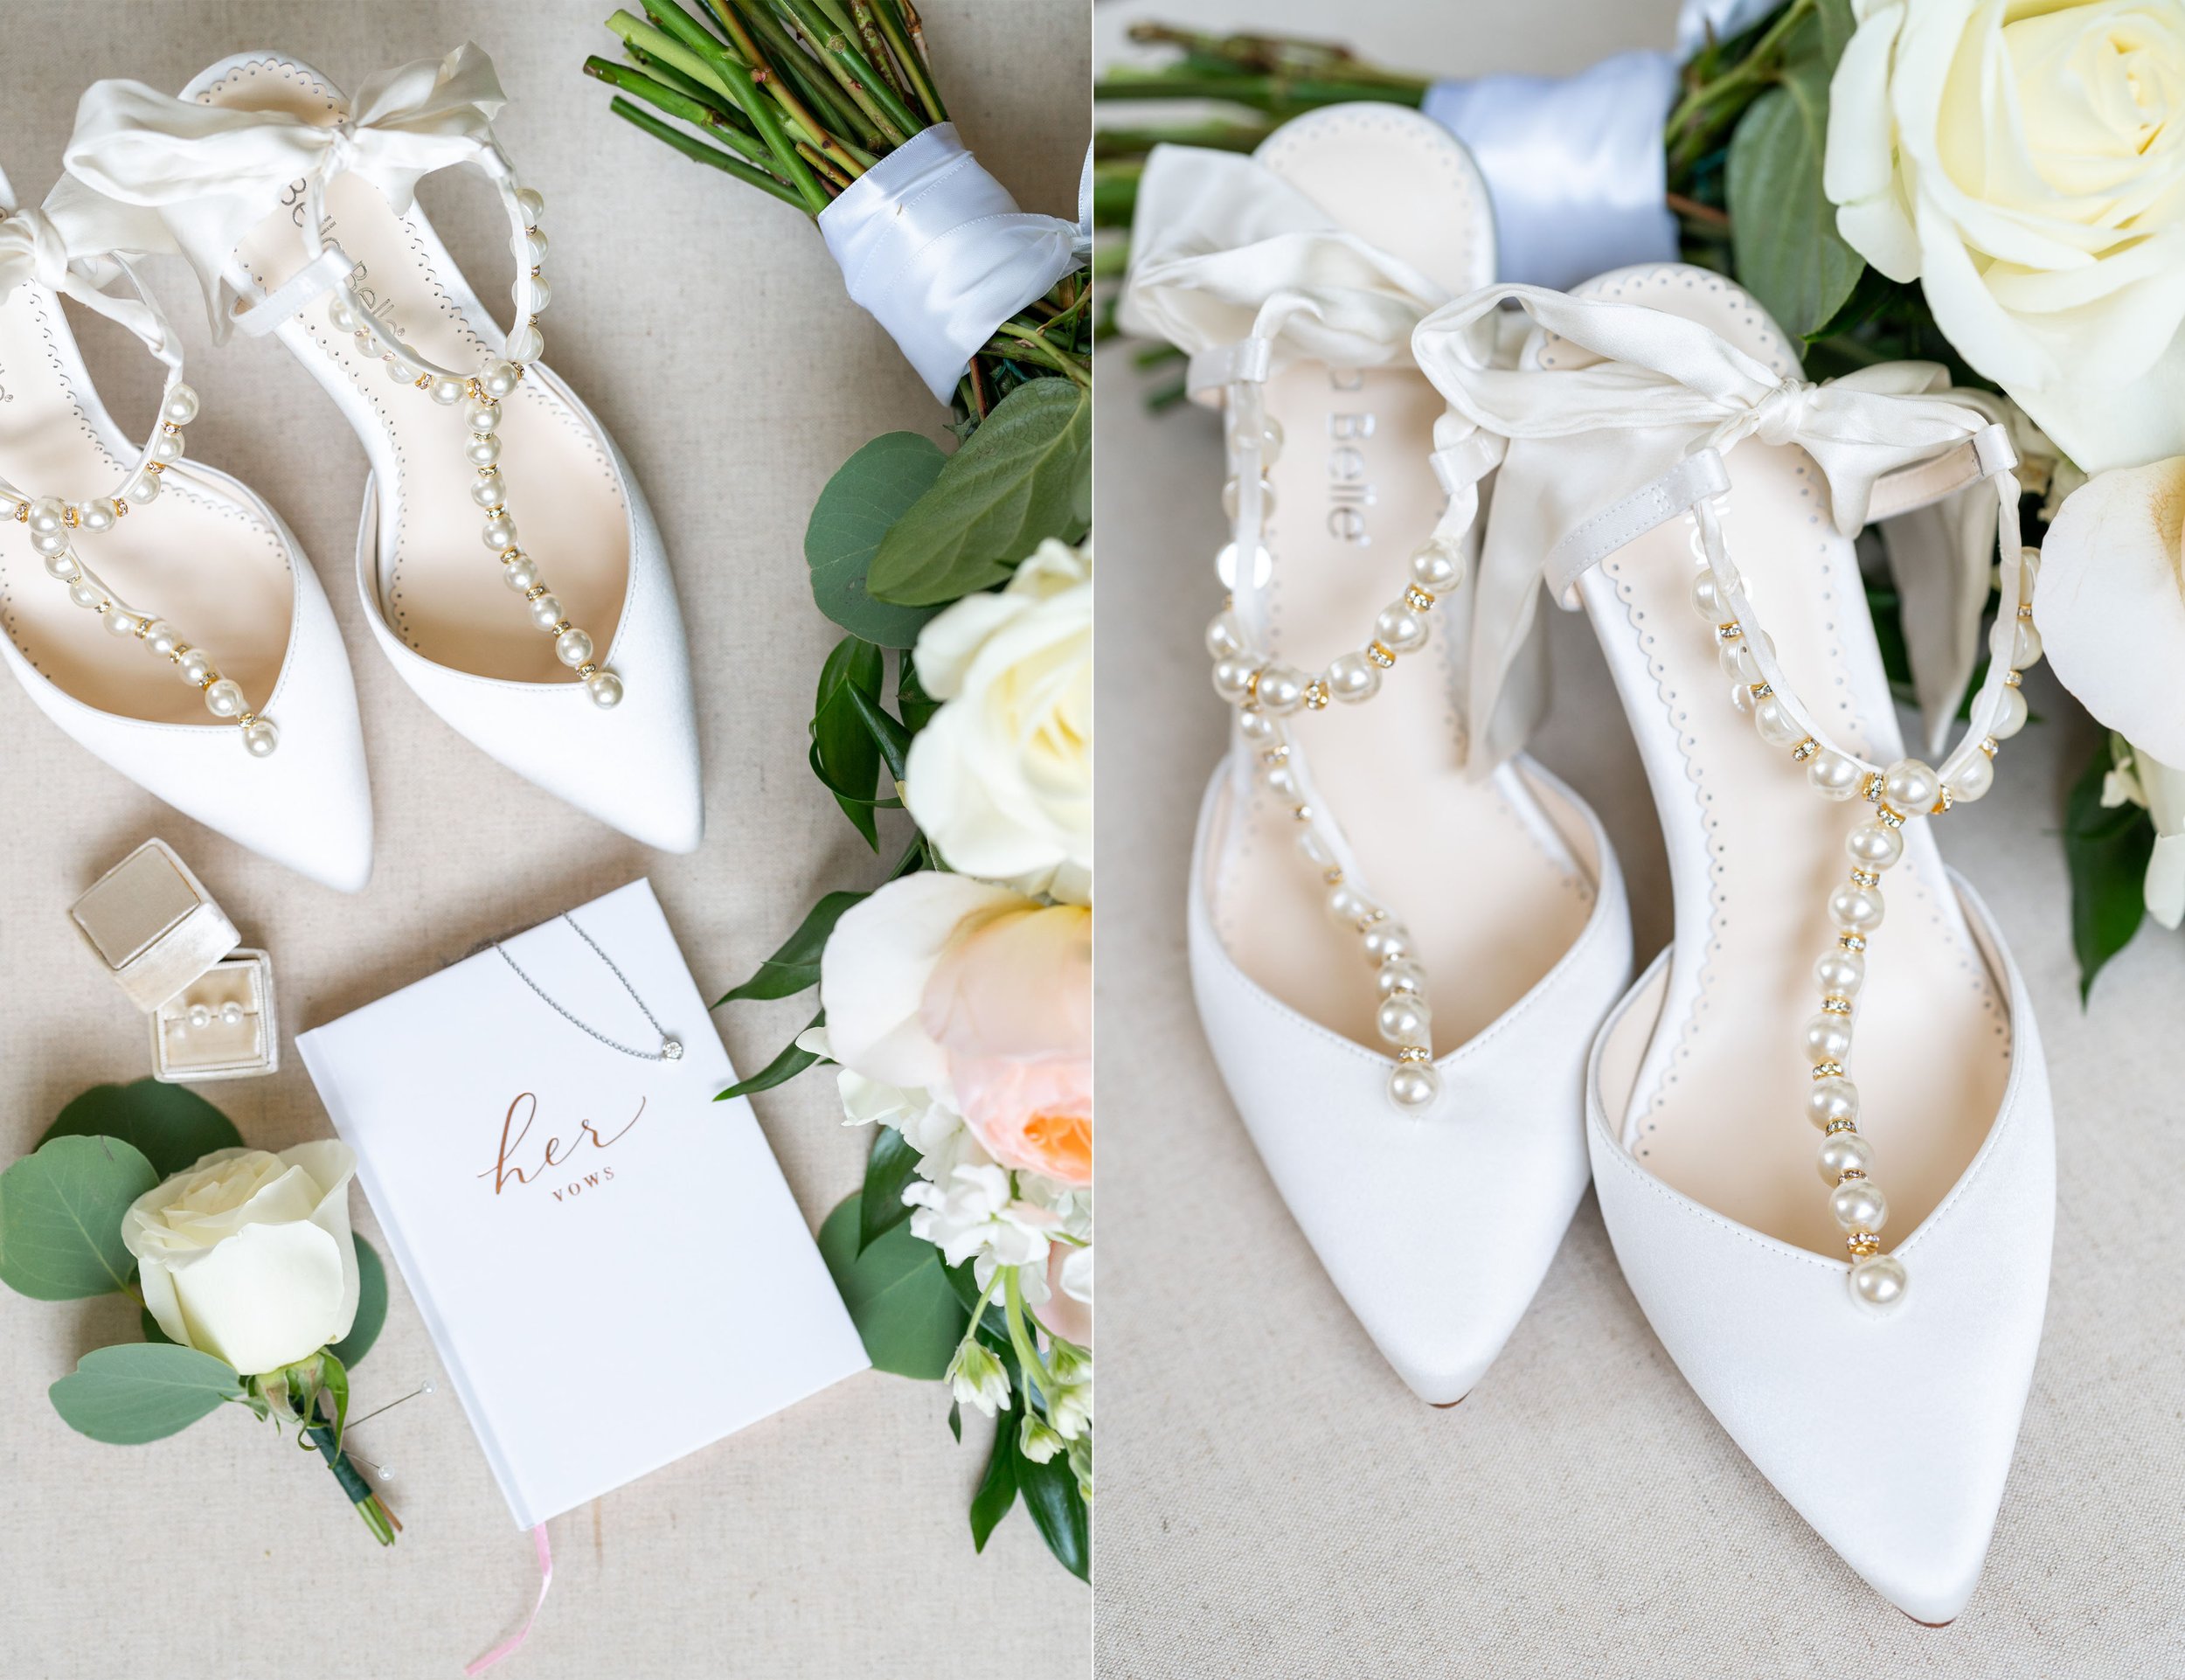 Bella Belle flat lay with Mrs Box and florals in ivory 